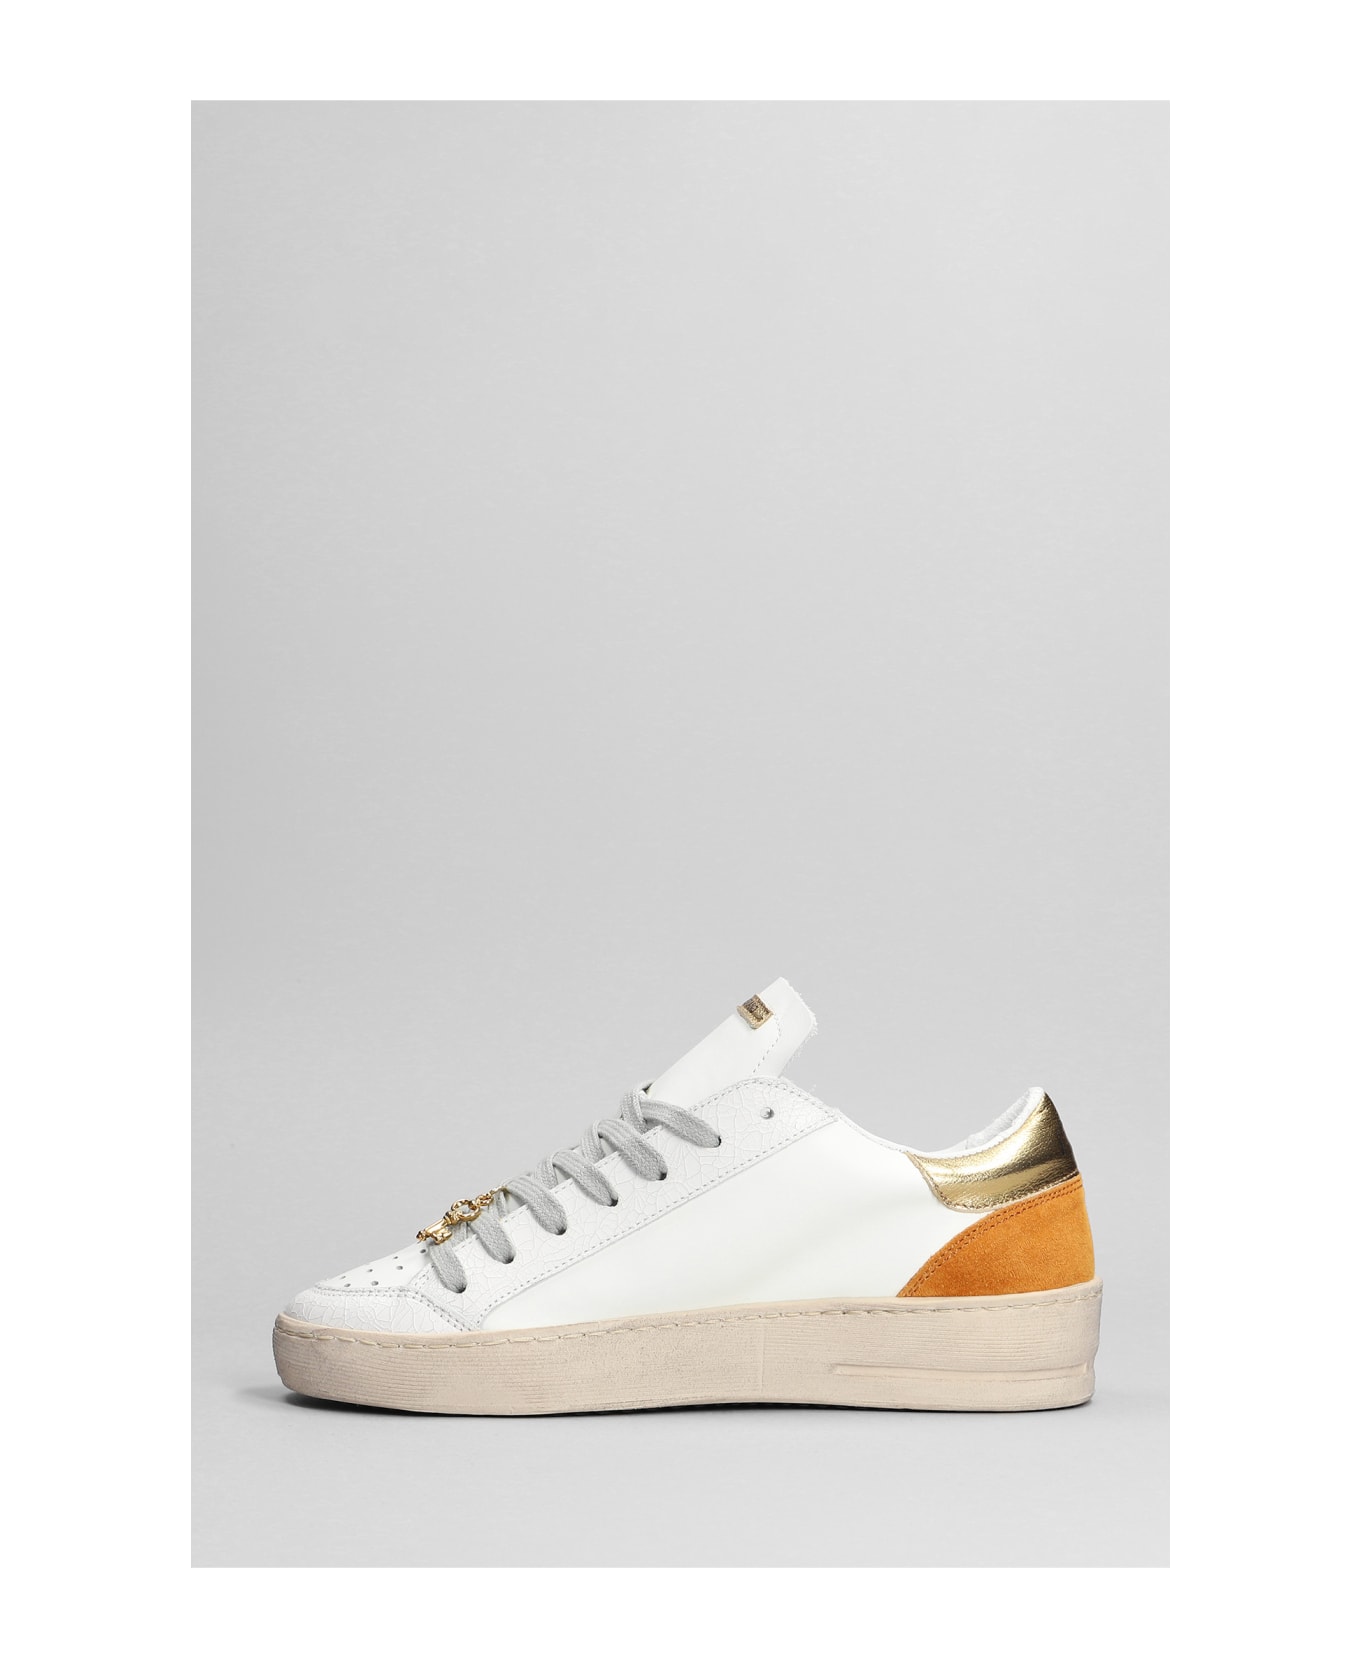 AMA-BRAND Sneakers In White Leather - white